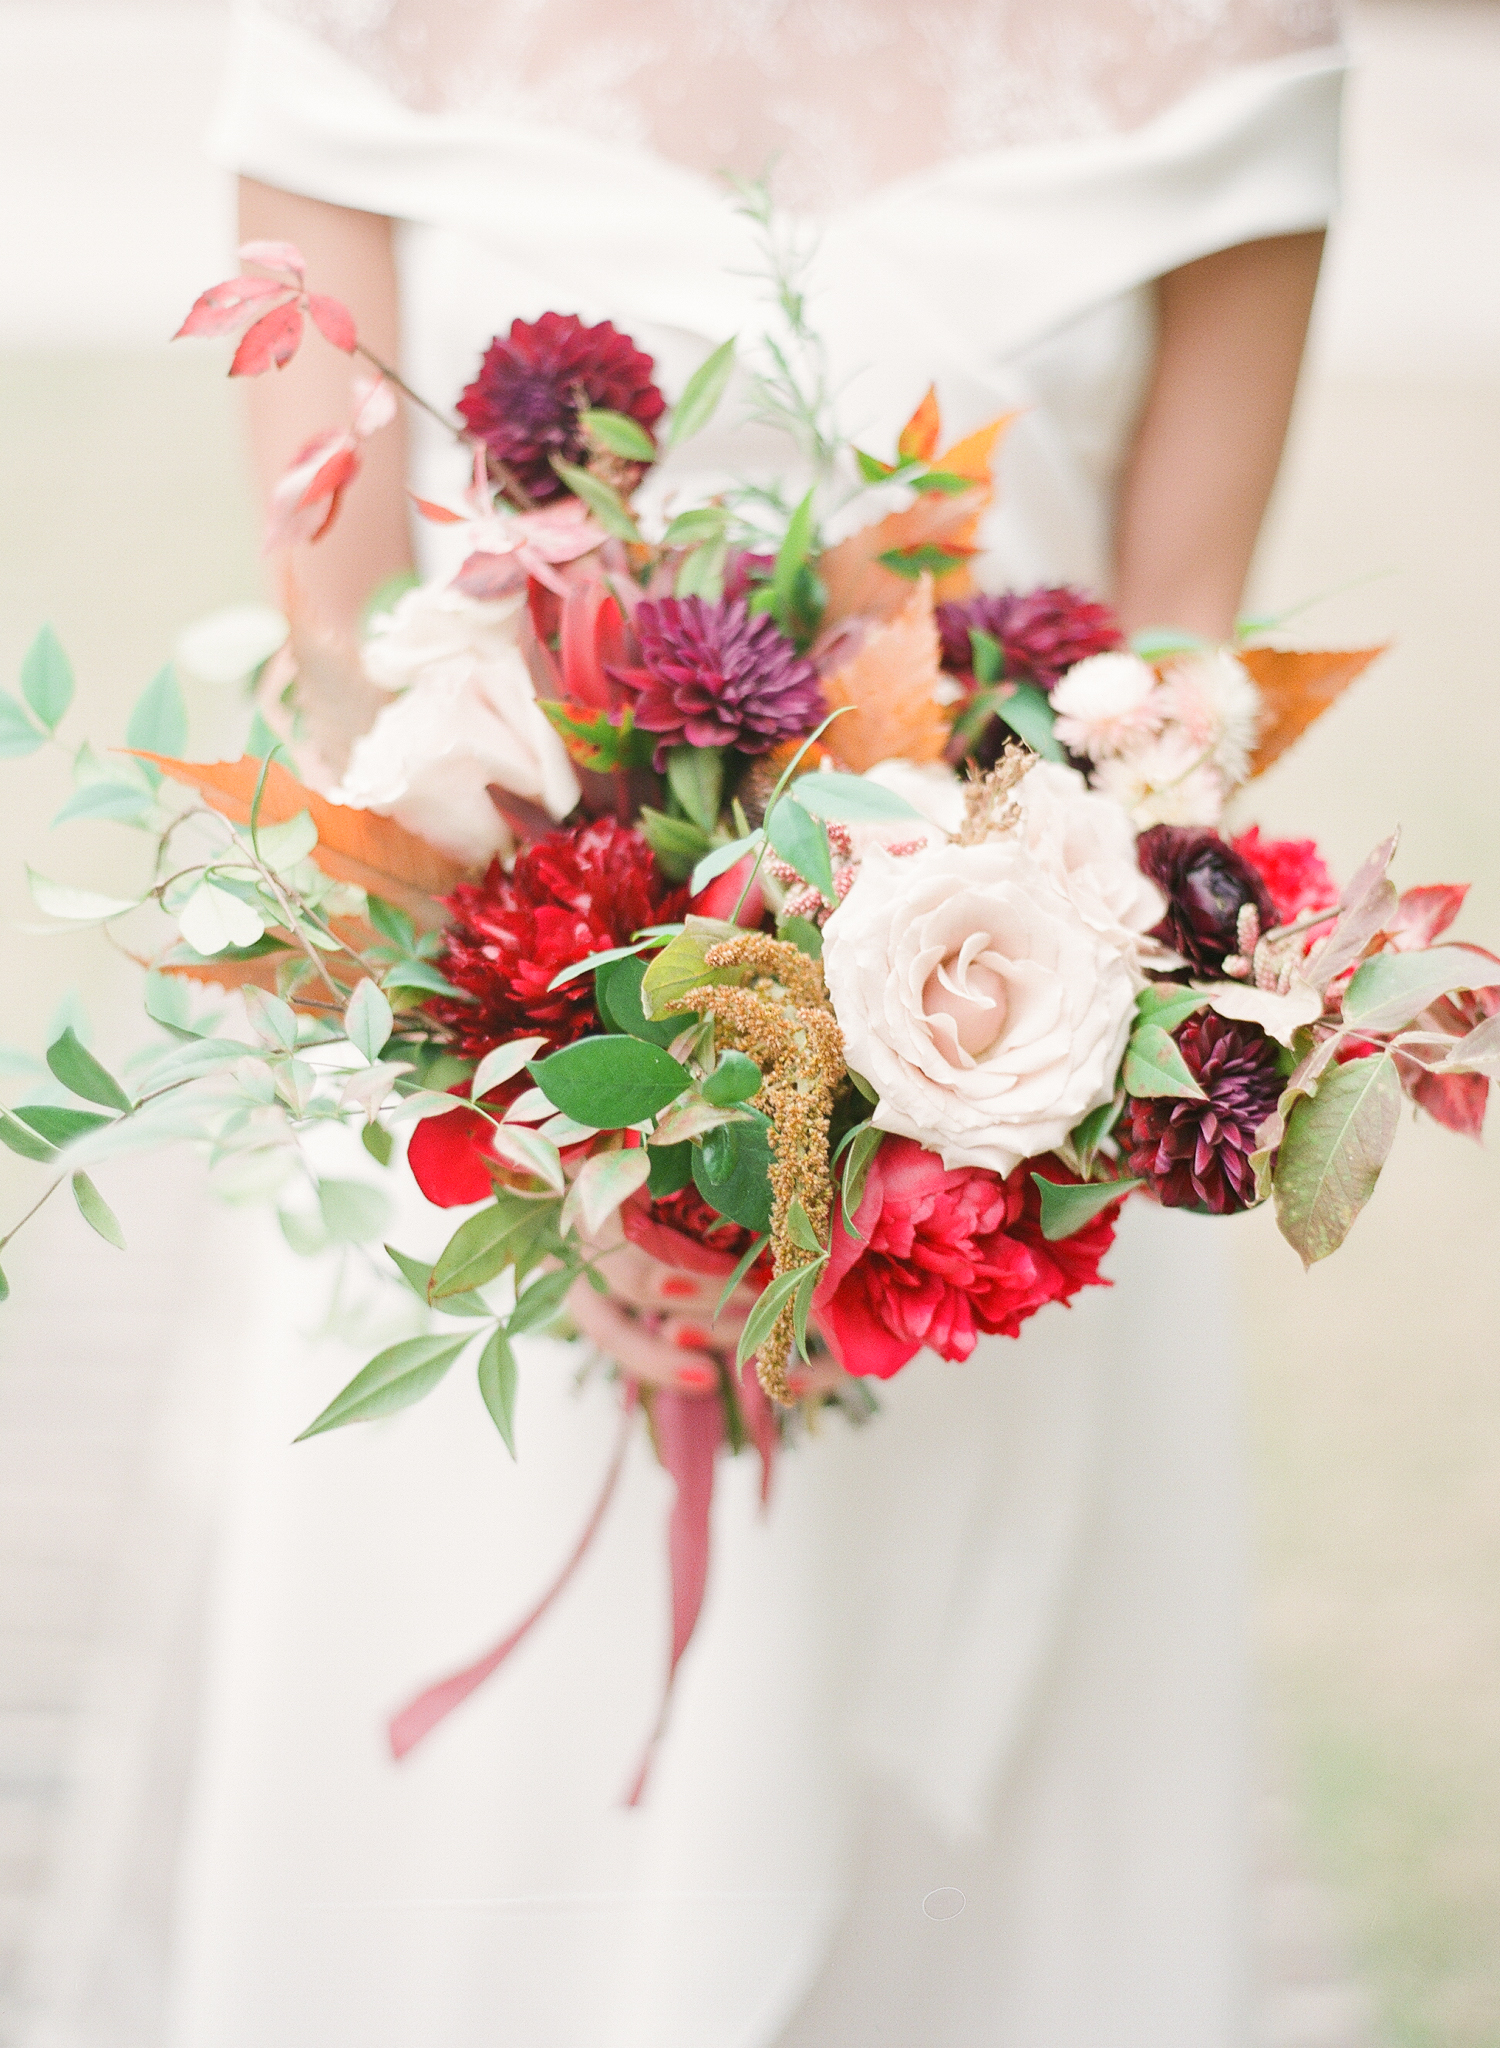 Legare Waring House Wedding Photography | Charleston Wedding Photographer | Charleston Film Photographer | Molly Carr Photography | The Petal Report | Fall Wedding Bouquet | Bridal Bouquet with Red Flowers